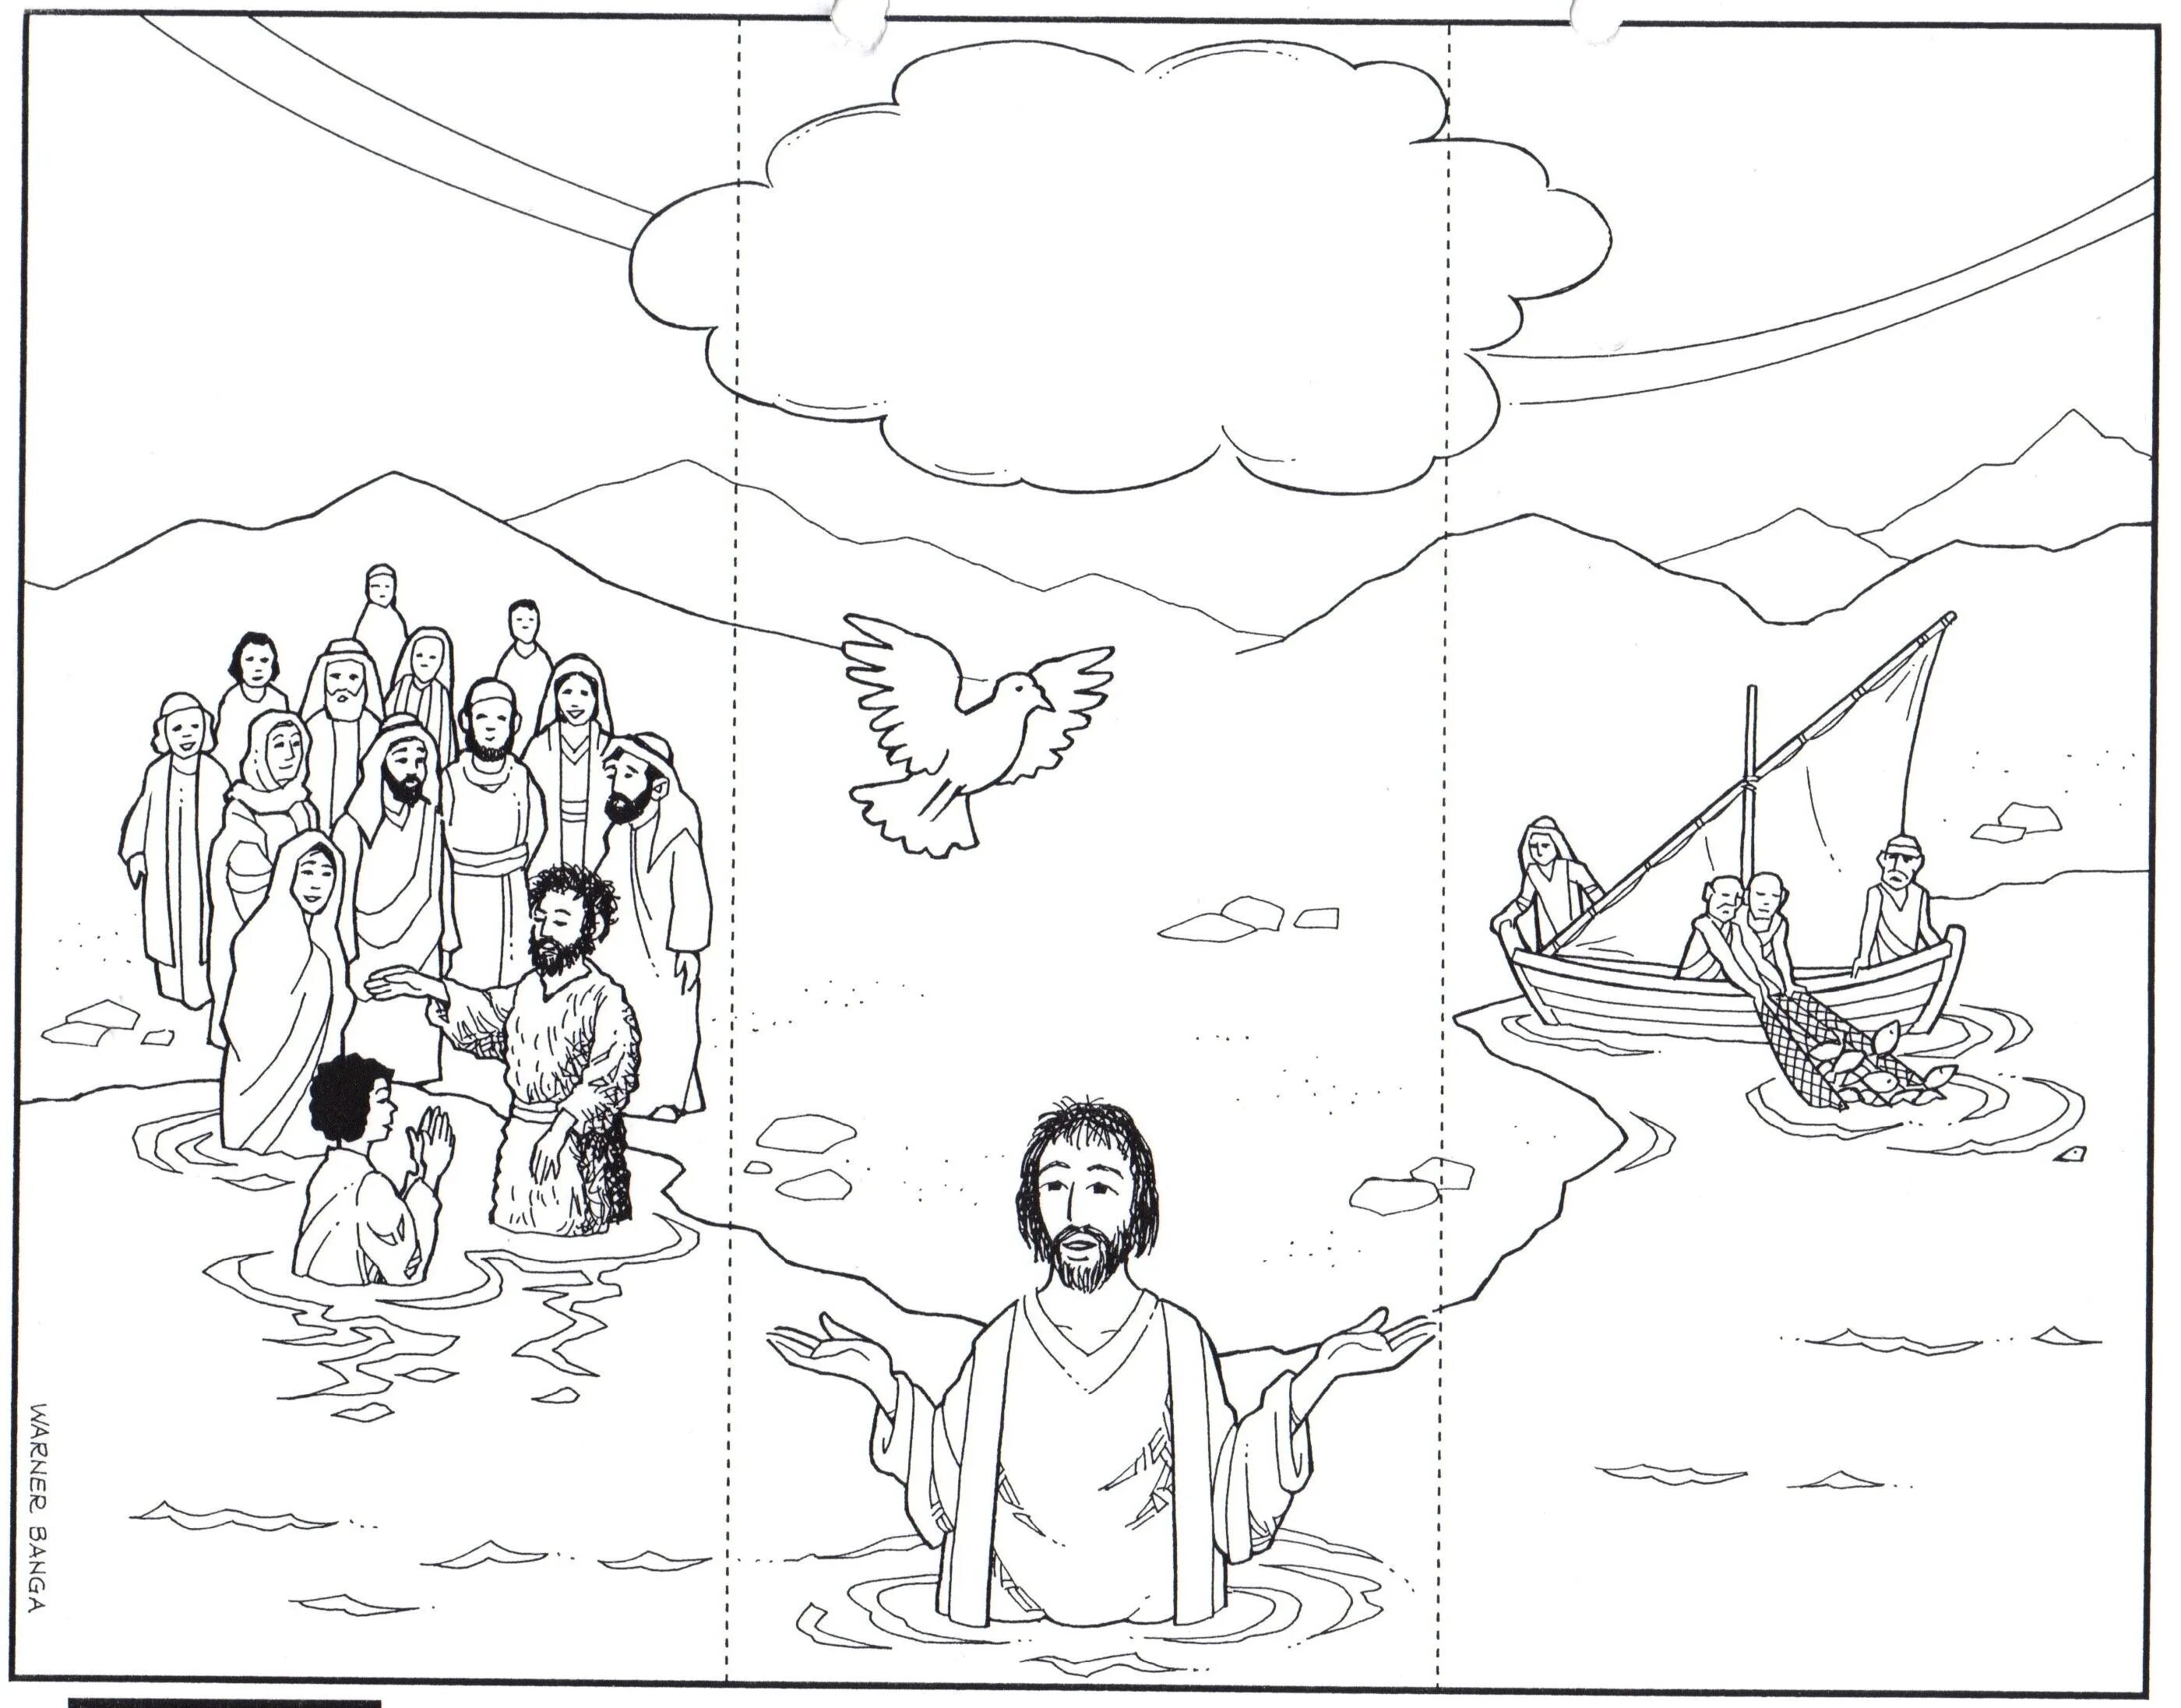 Sparkling baptism of the Lord coloring book